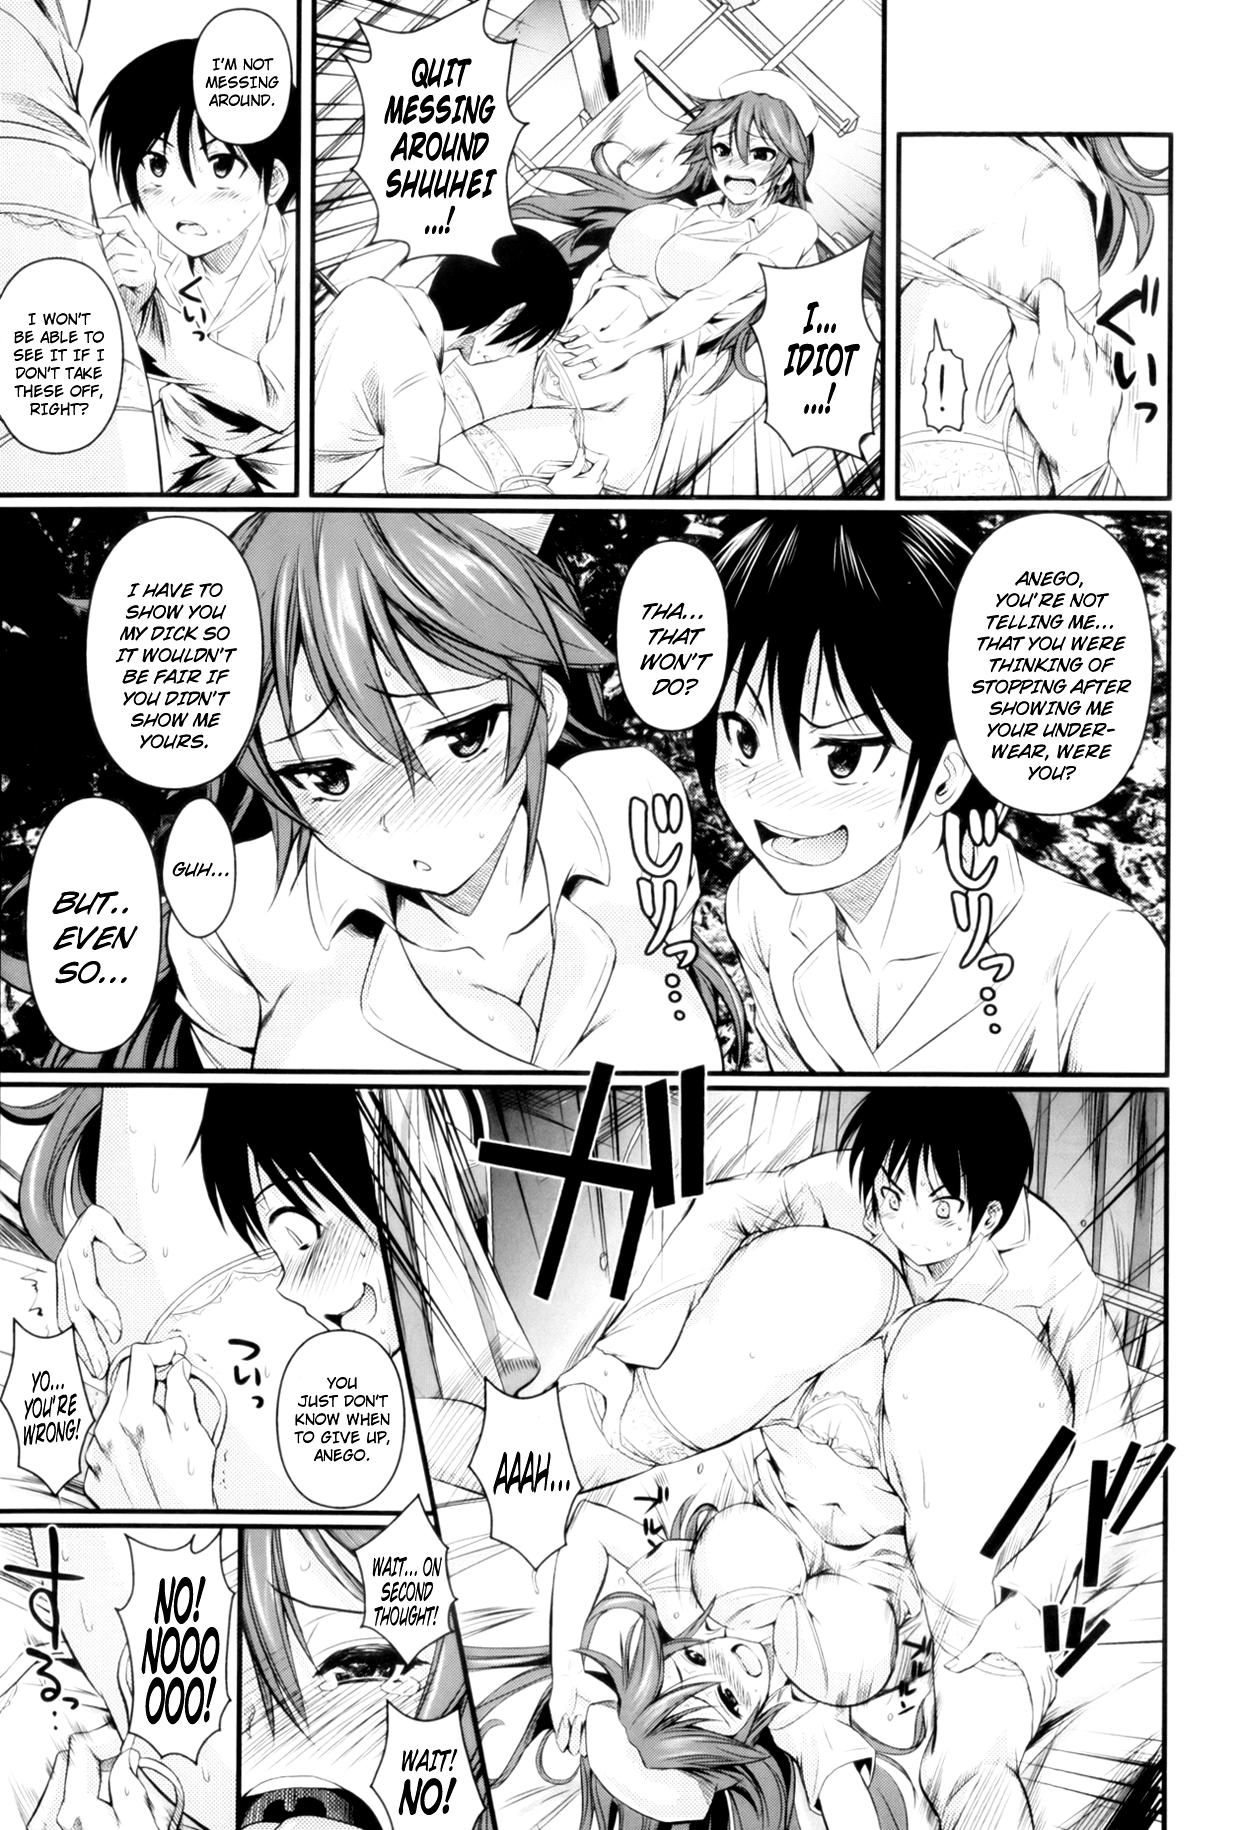 Groupsex Tenshi na Anego | An Angelic Anego Screaming - Page 9